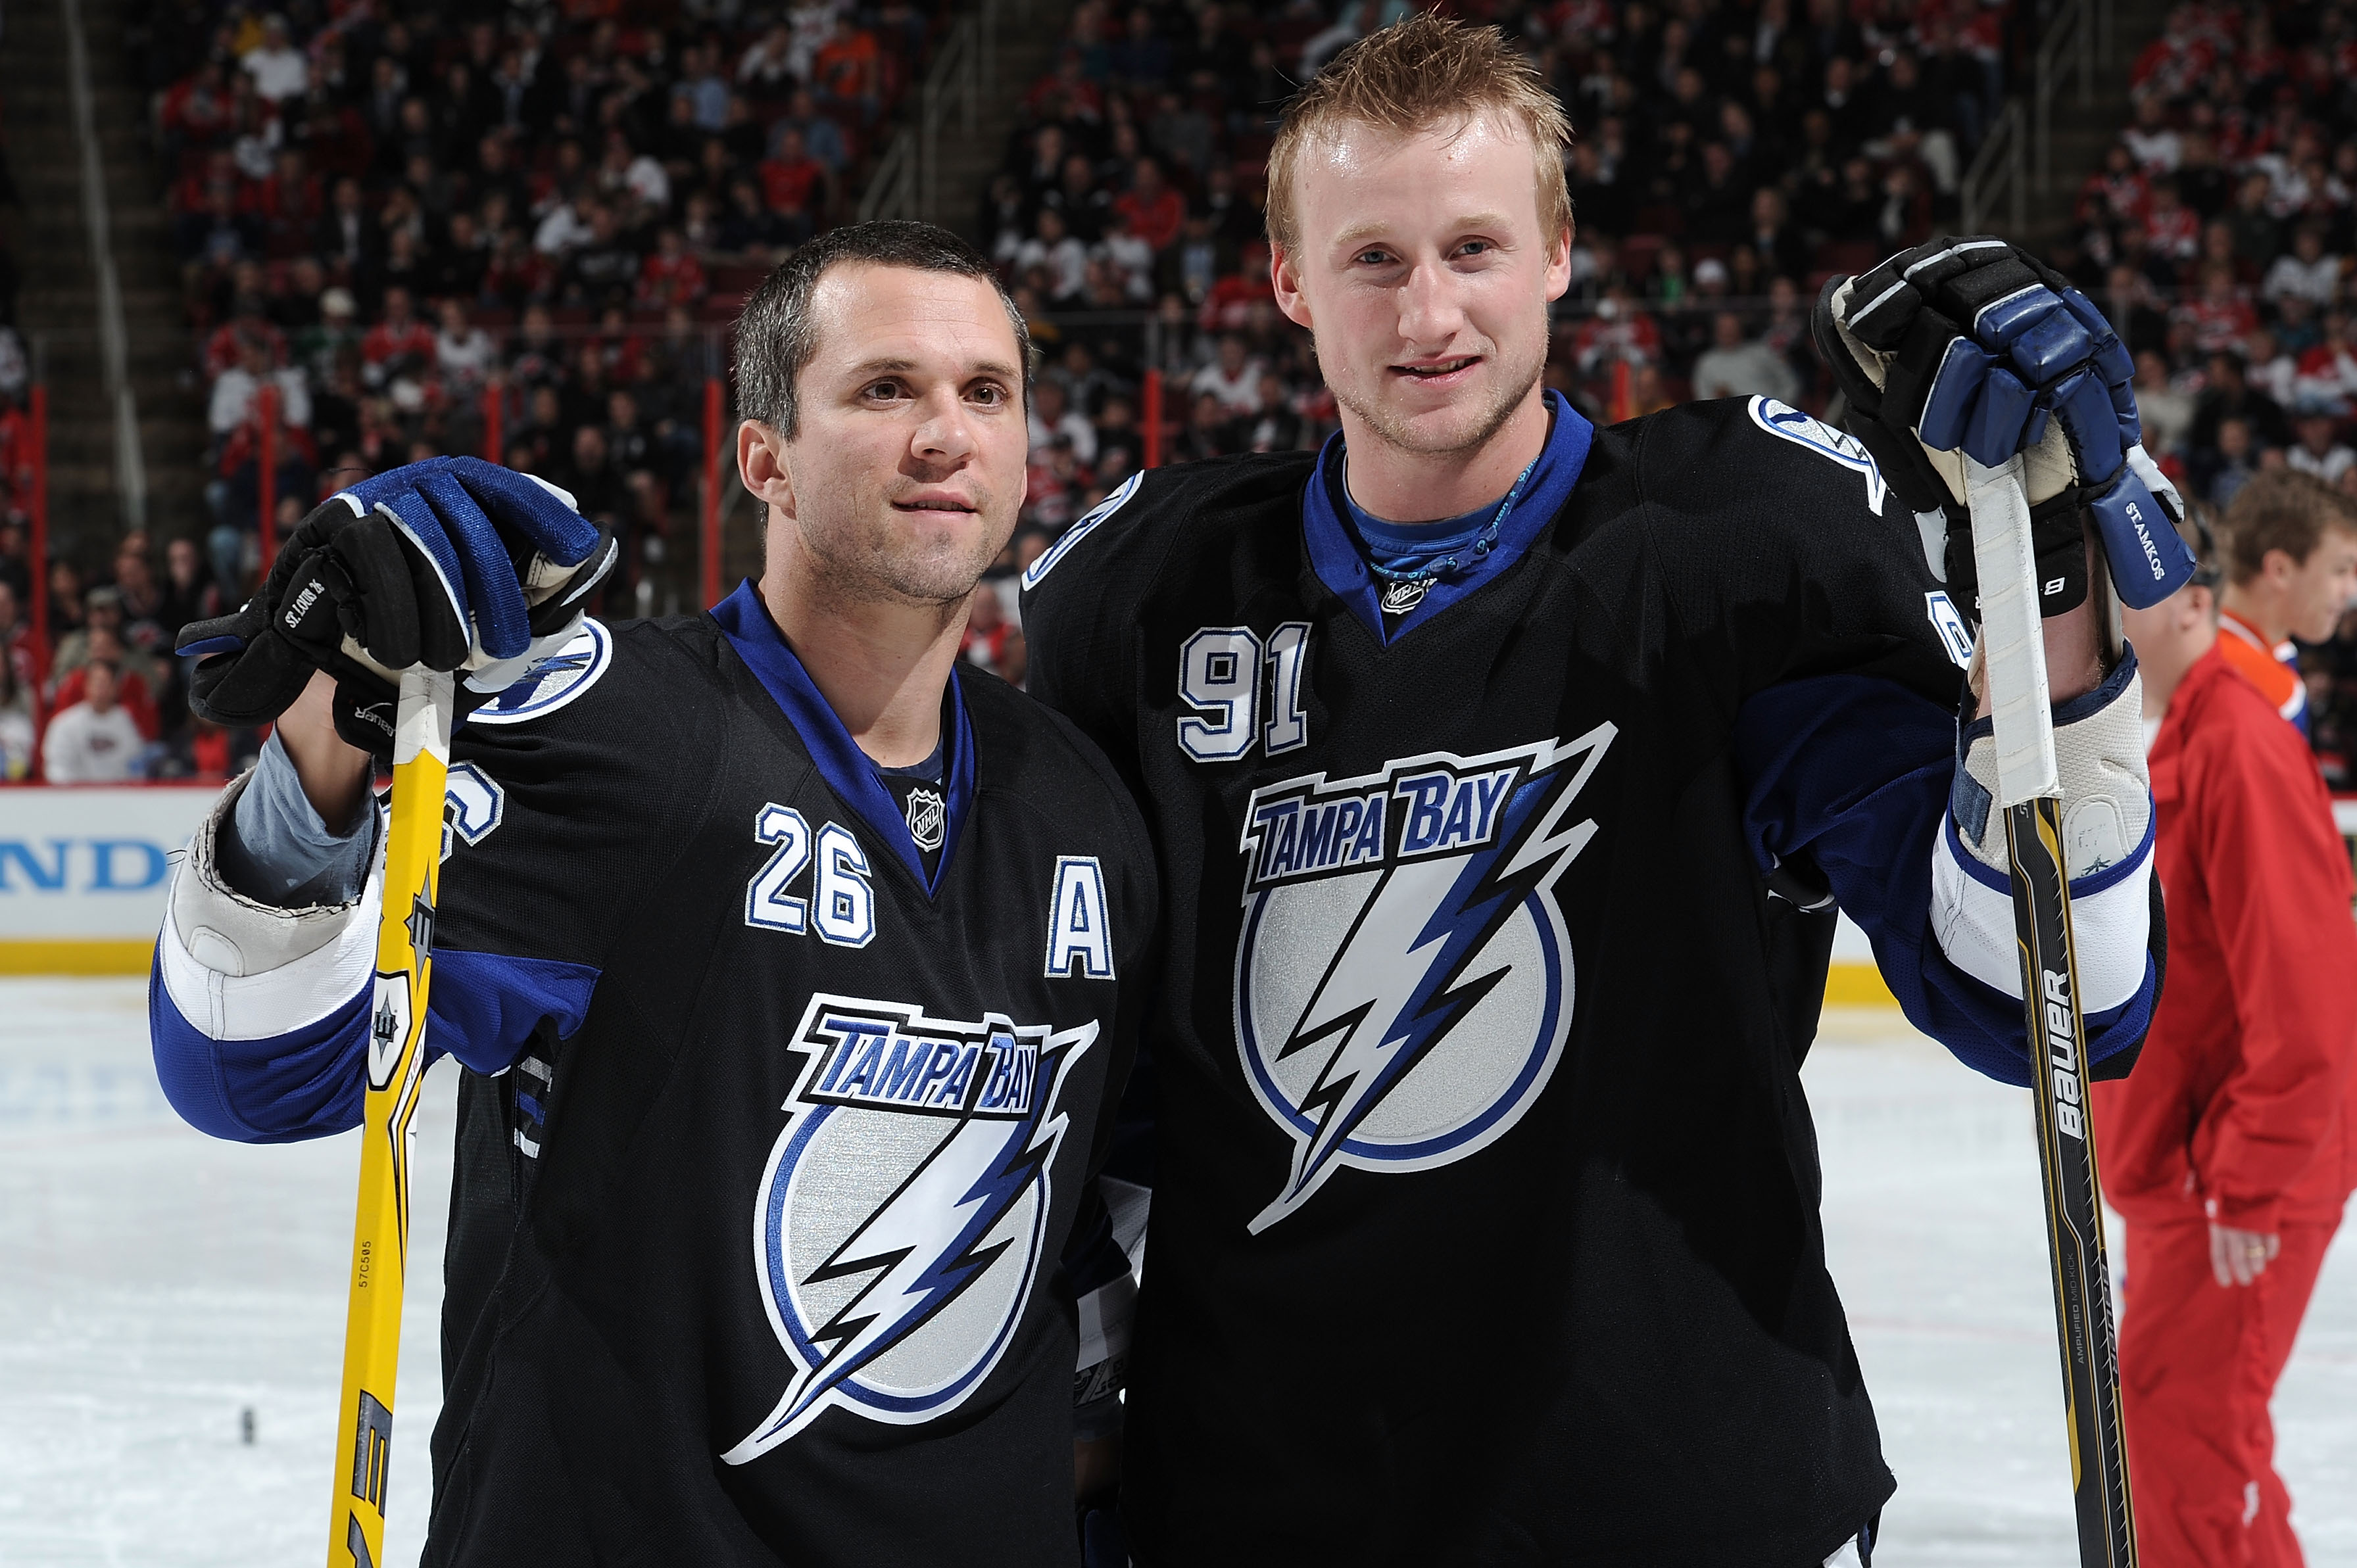 NHL All-Star Game 2011: 10 Things We Learned